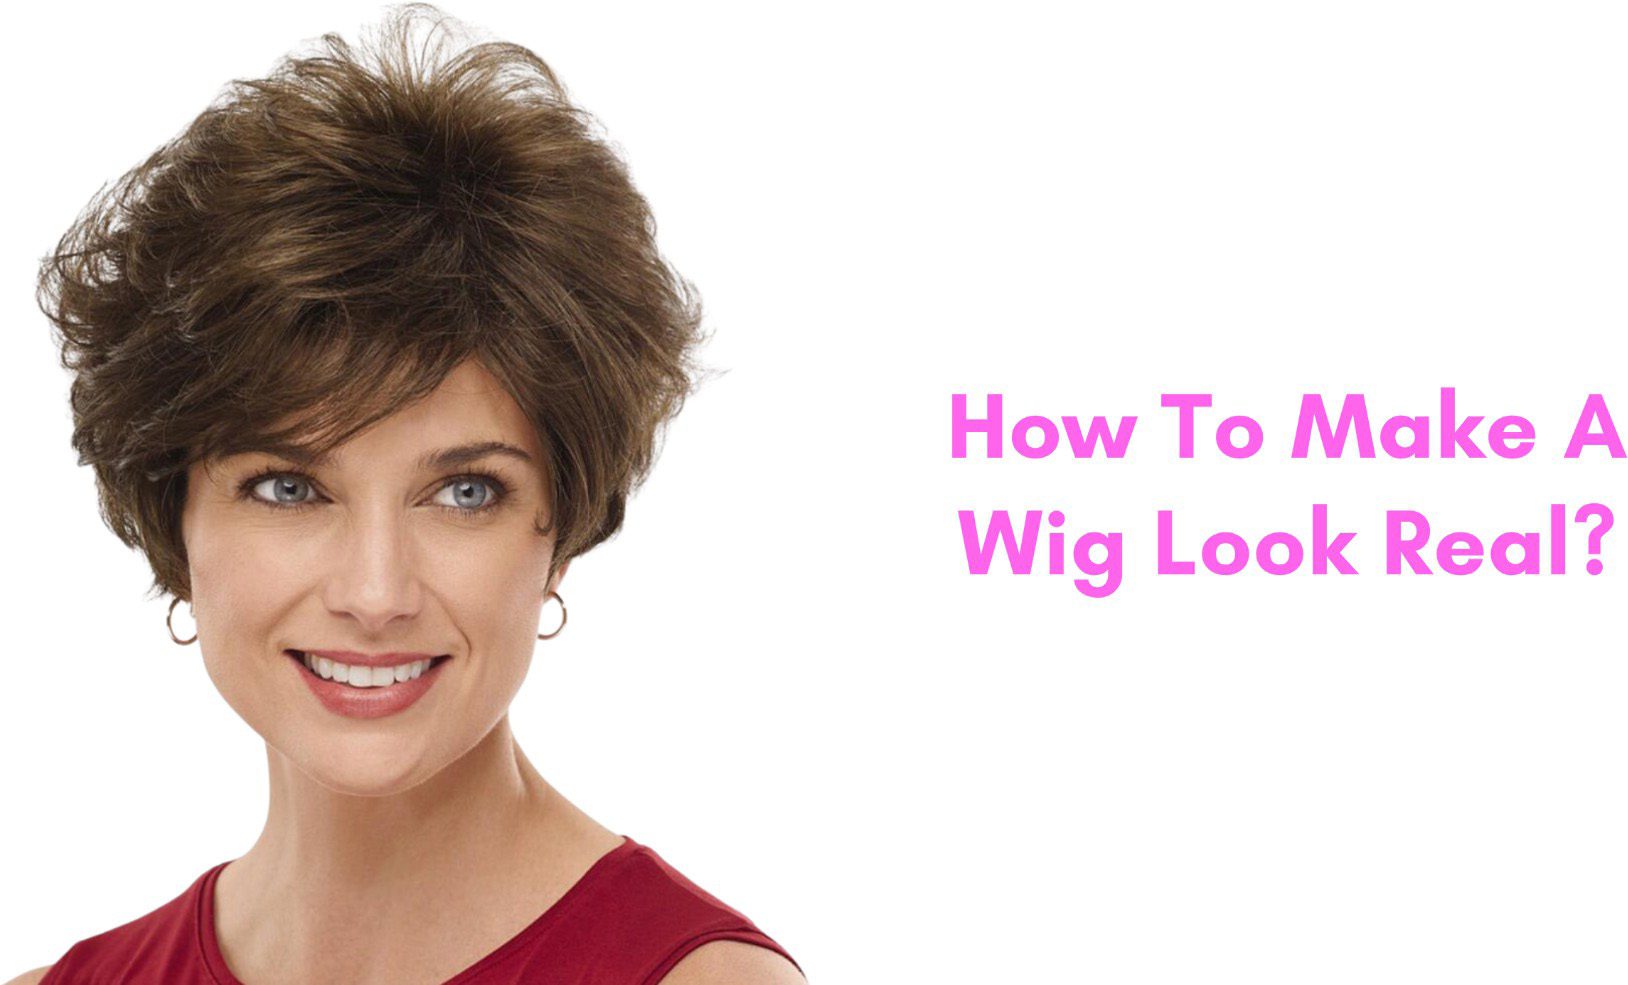 How To Make A Wig Look Real?